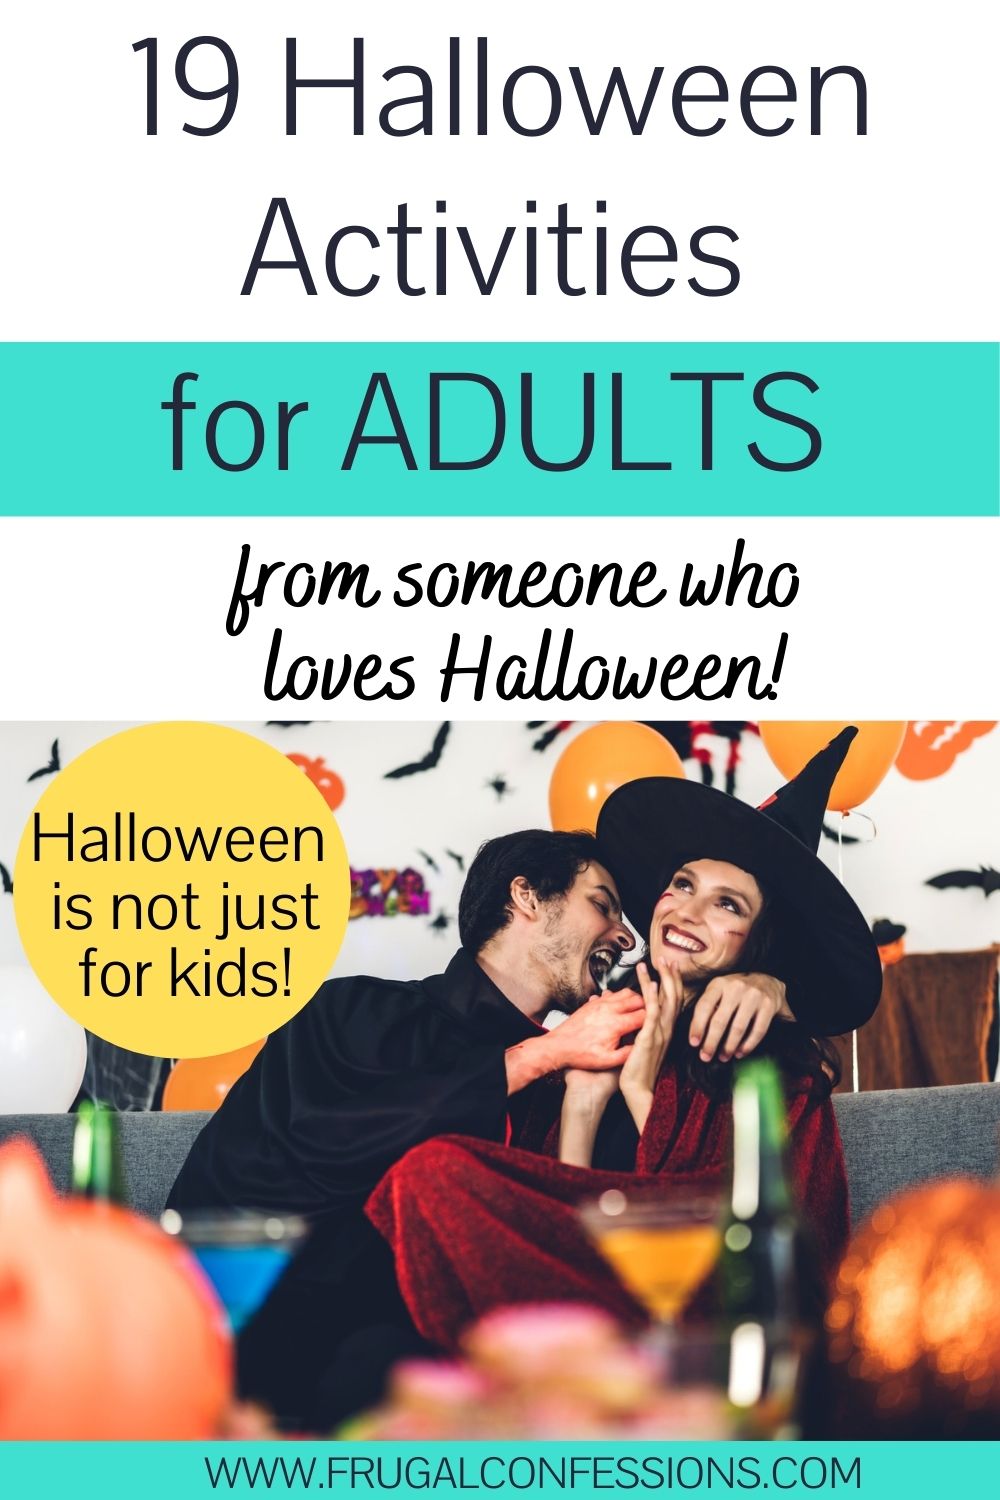 adult couple on couch giggling, in costumes, text overlay 